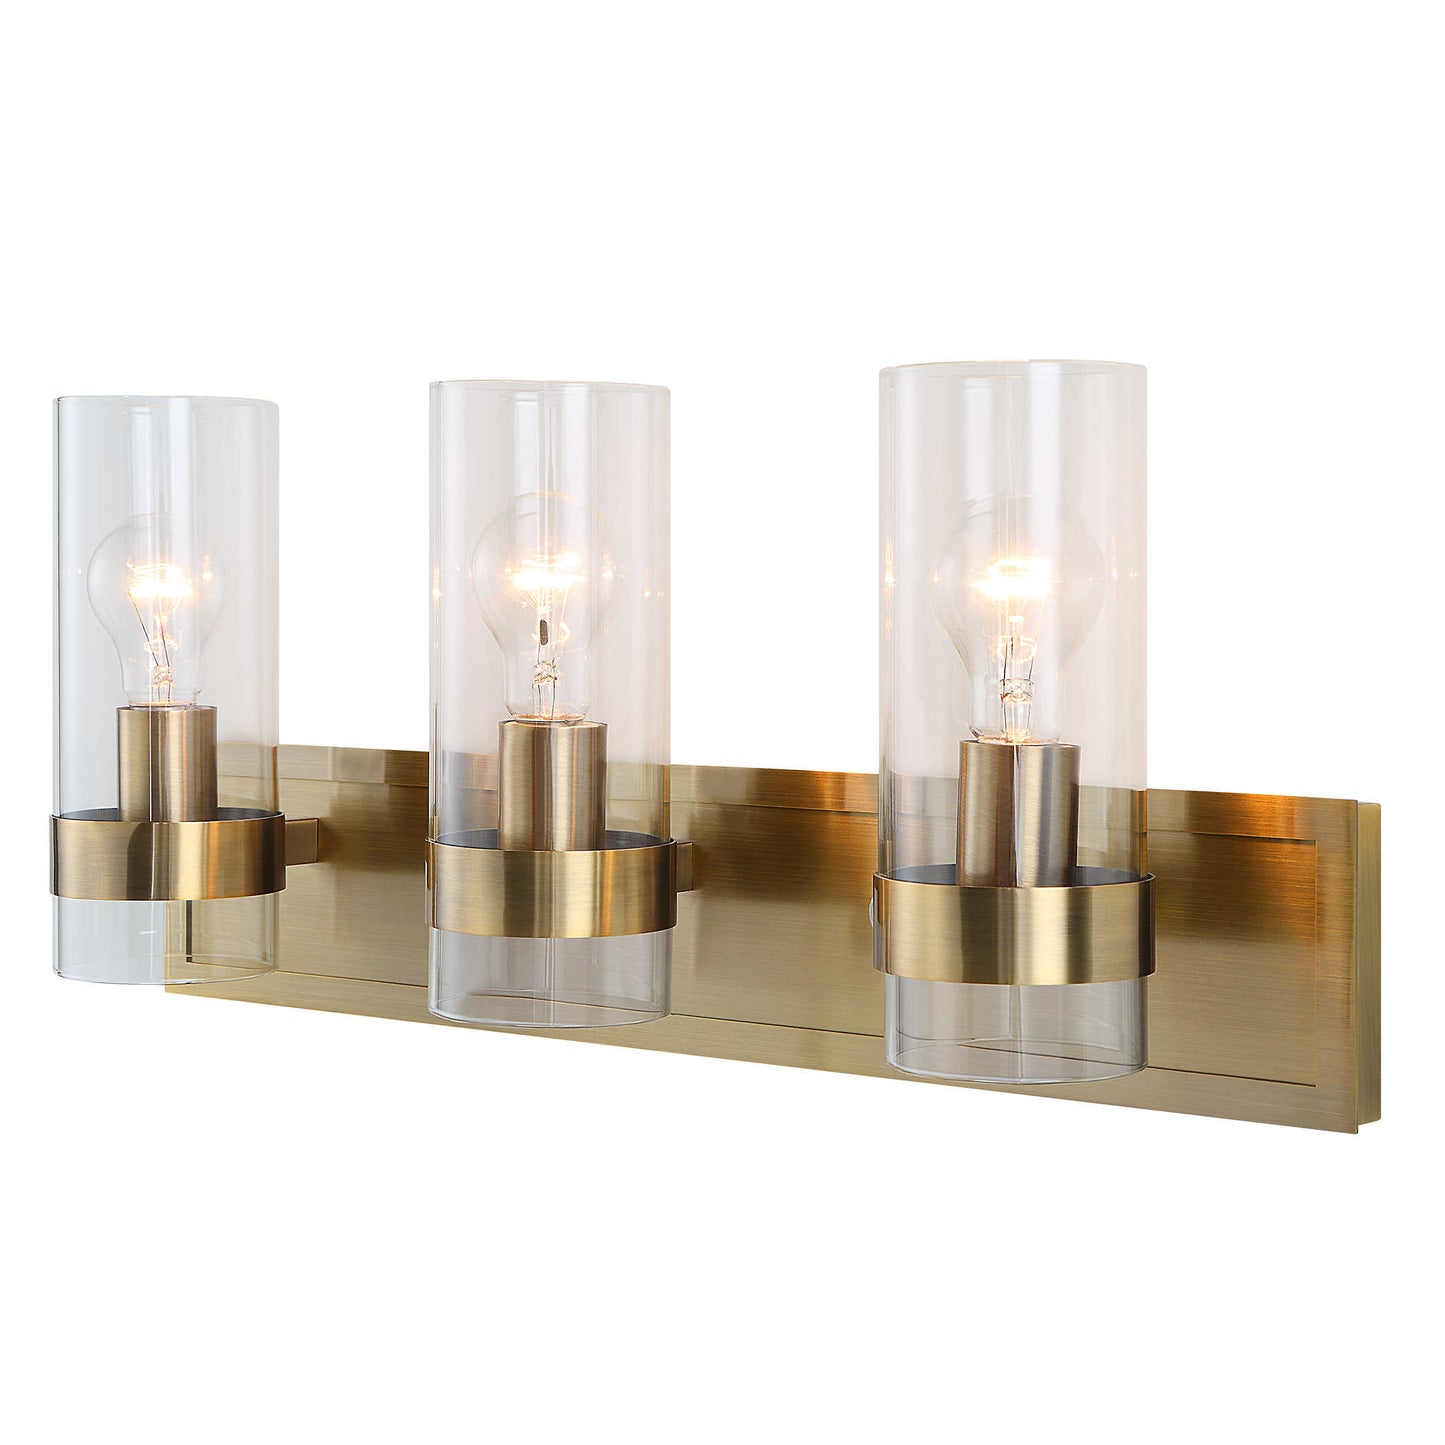 CARDIFF SCONCE LIGHT COLLECTION